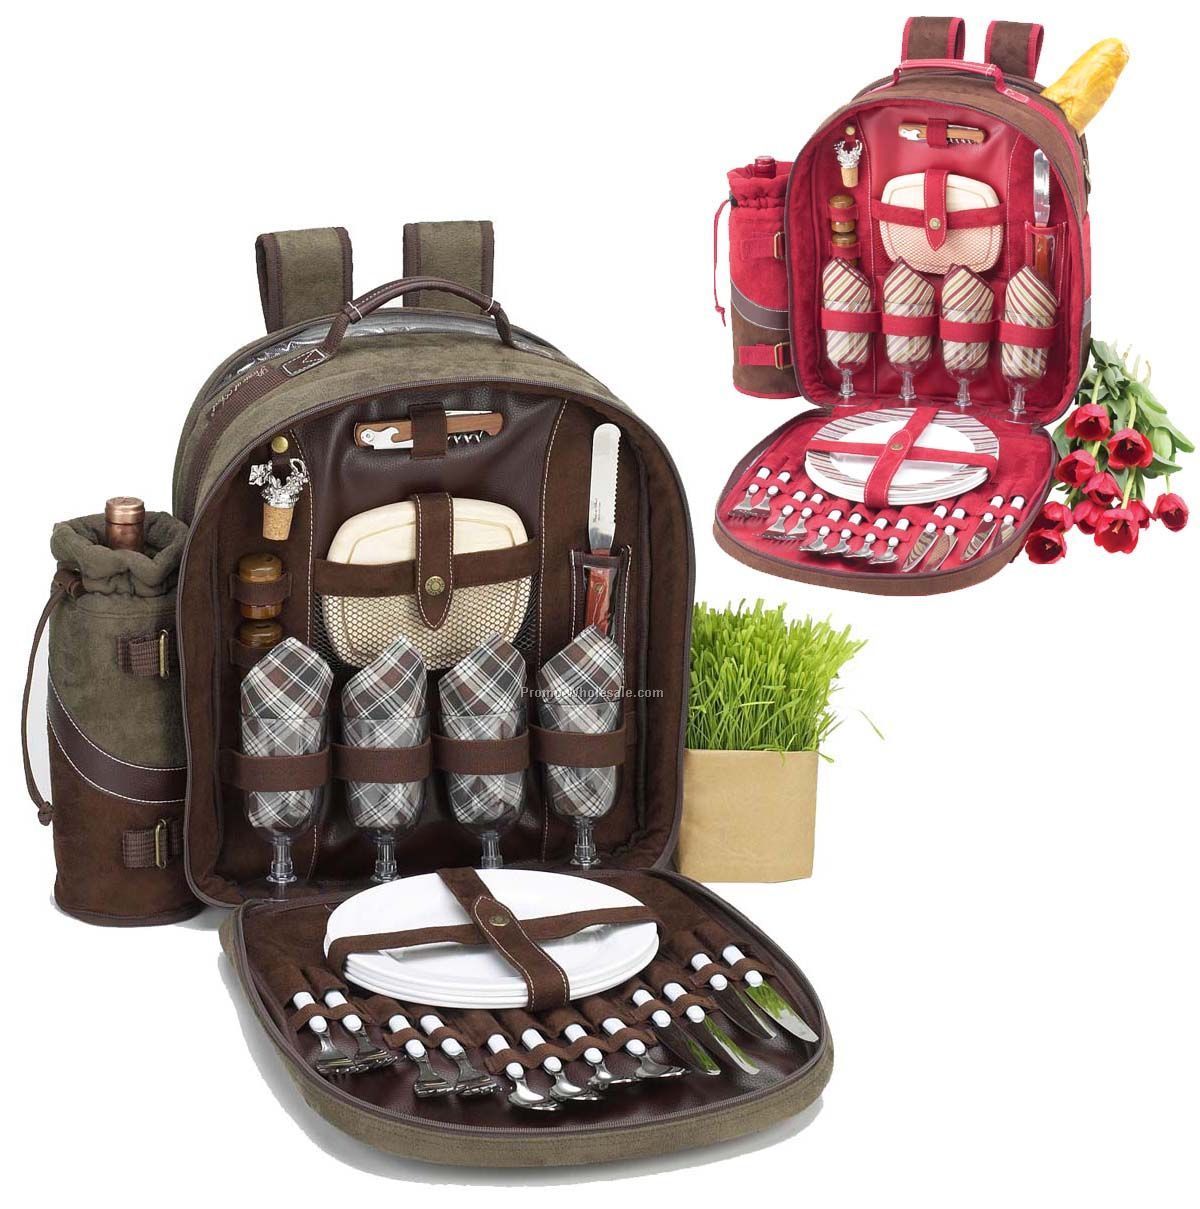 16"x17"x7.5" Picnic Backpack Cooler For Four